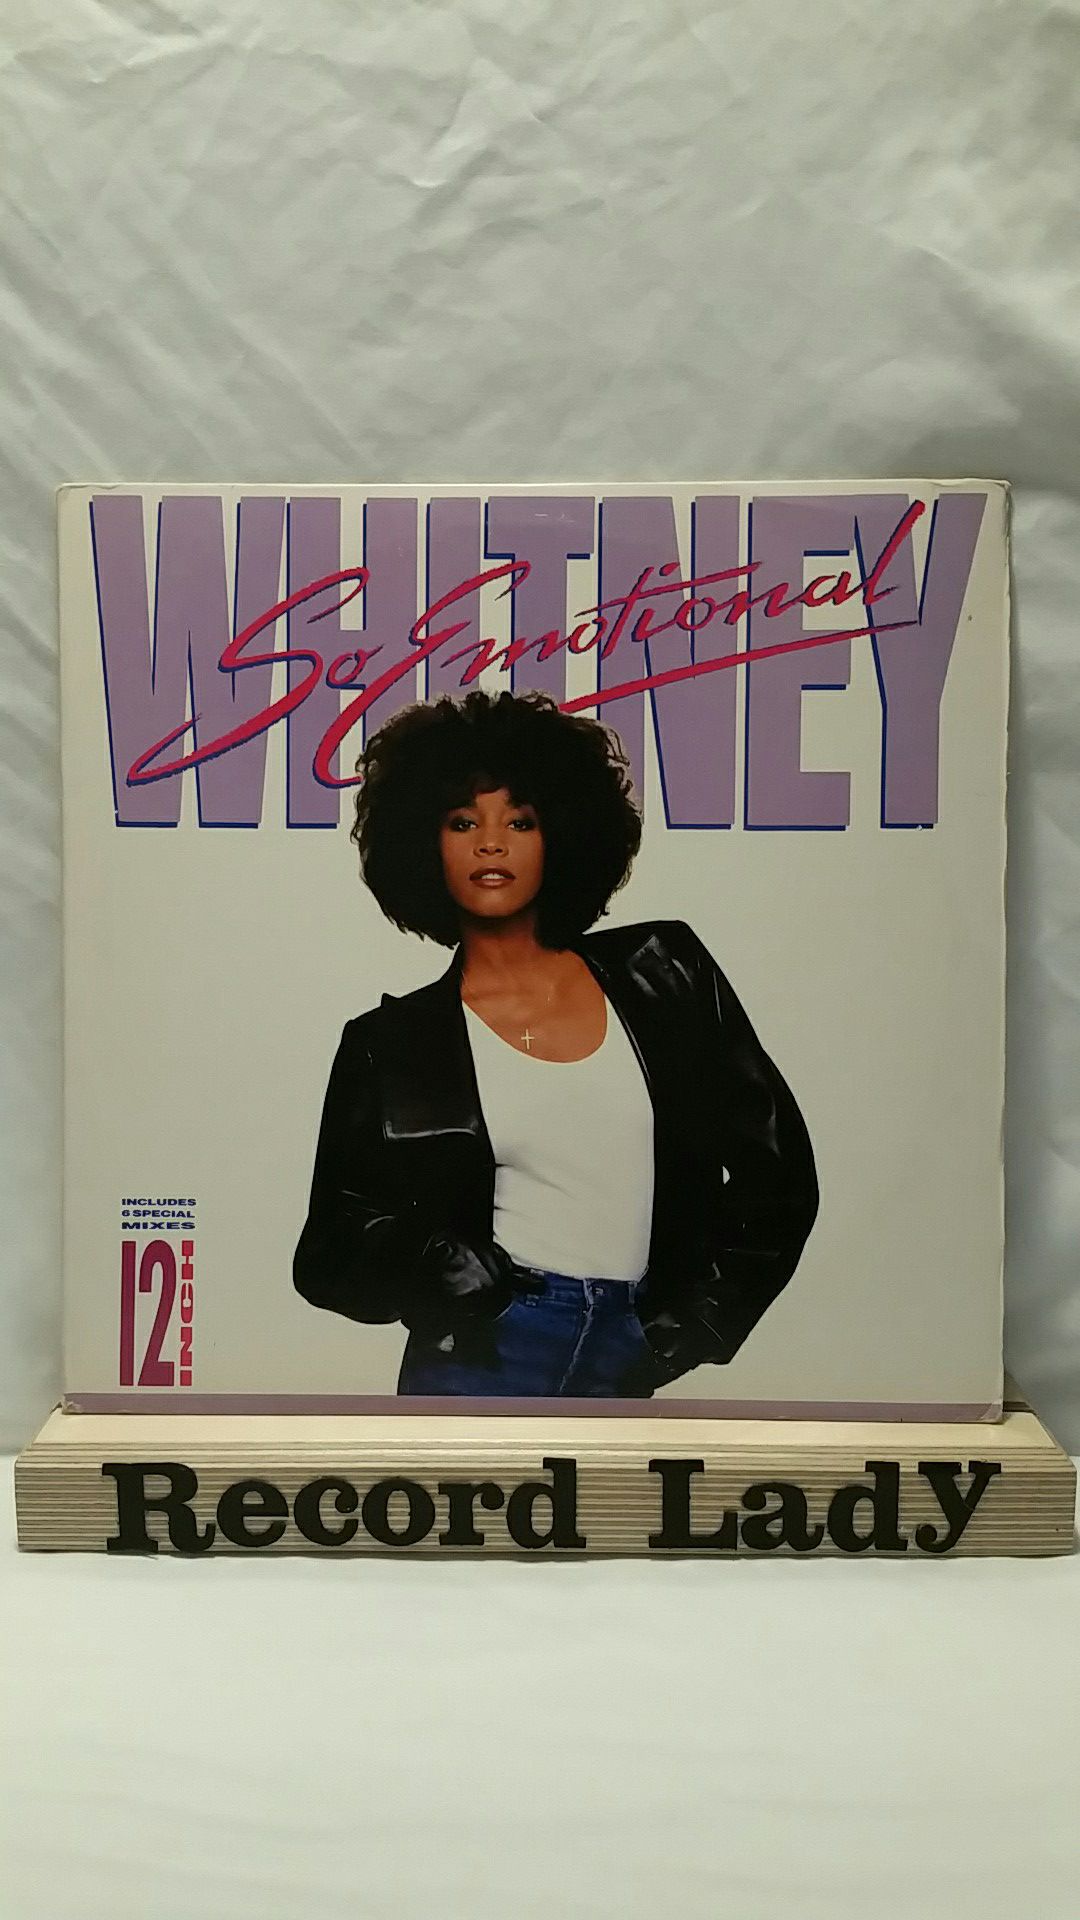 Whitney Houston "So Emotional"(comes with poster) vinyl record pop / R&B